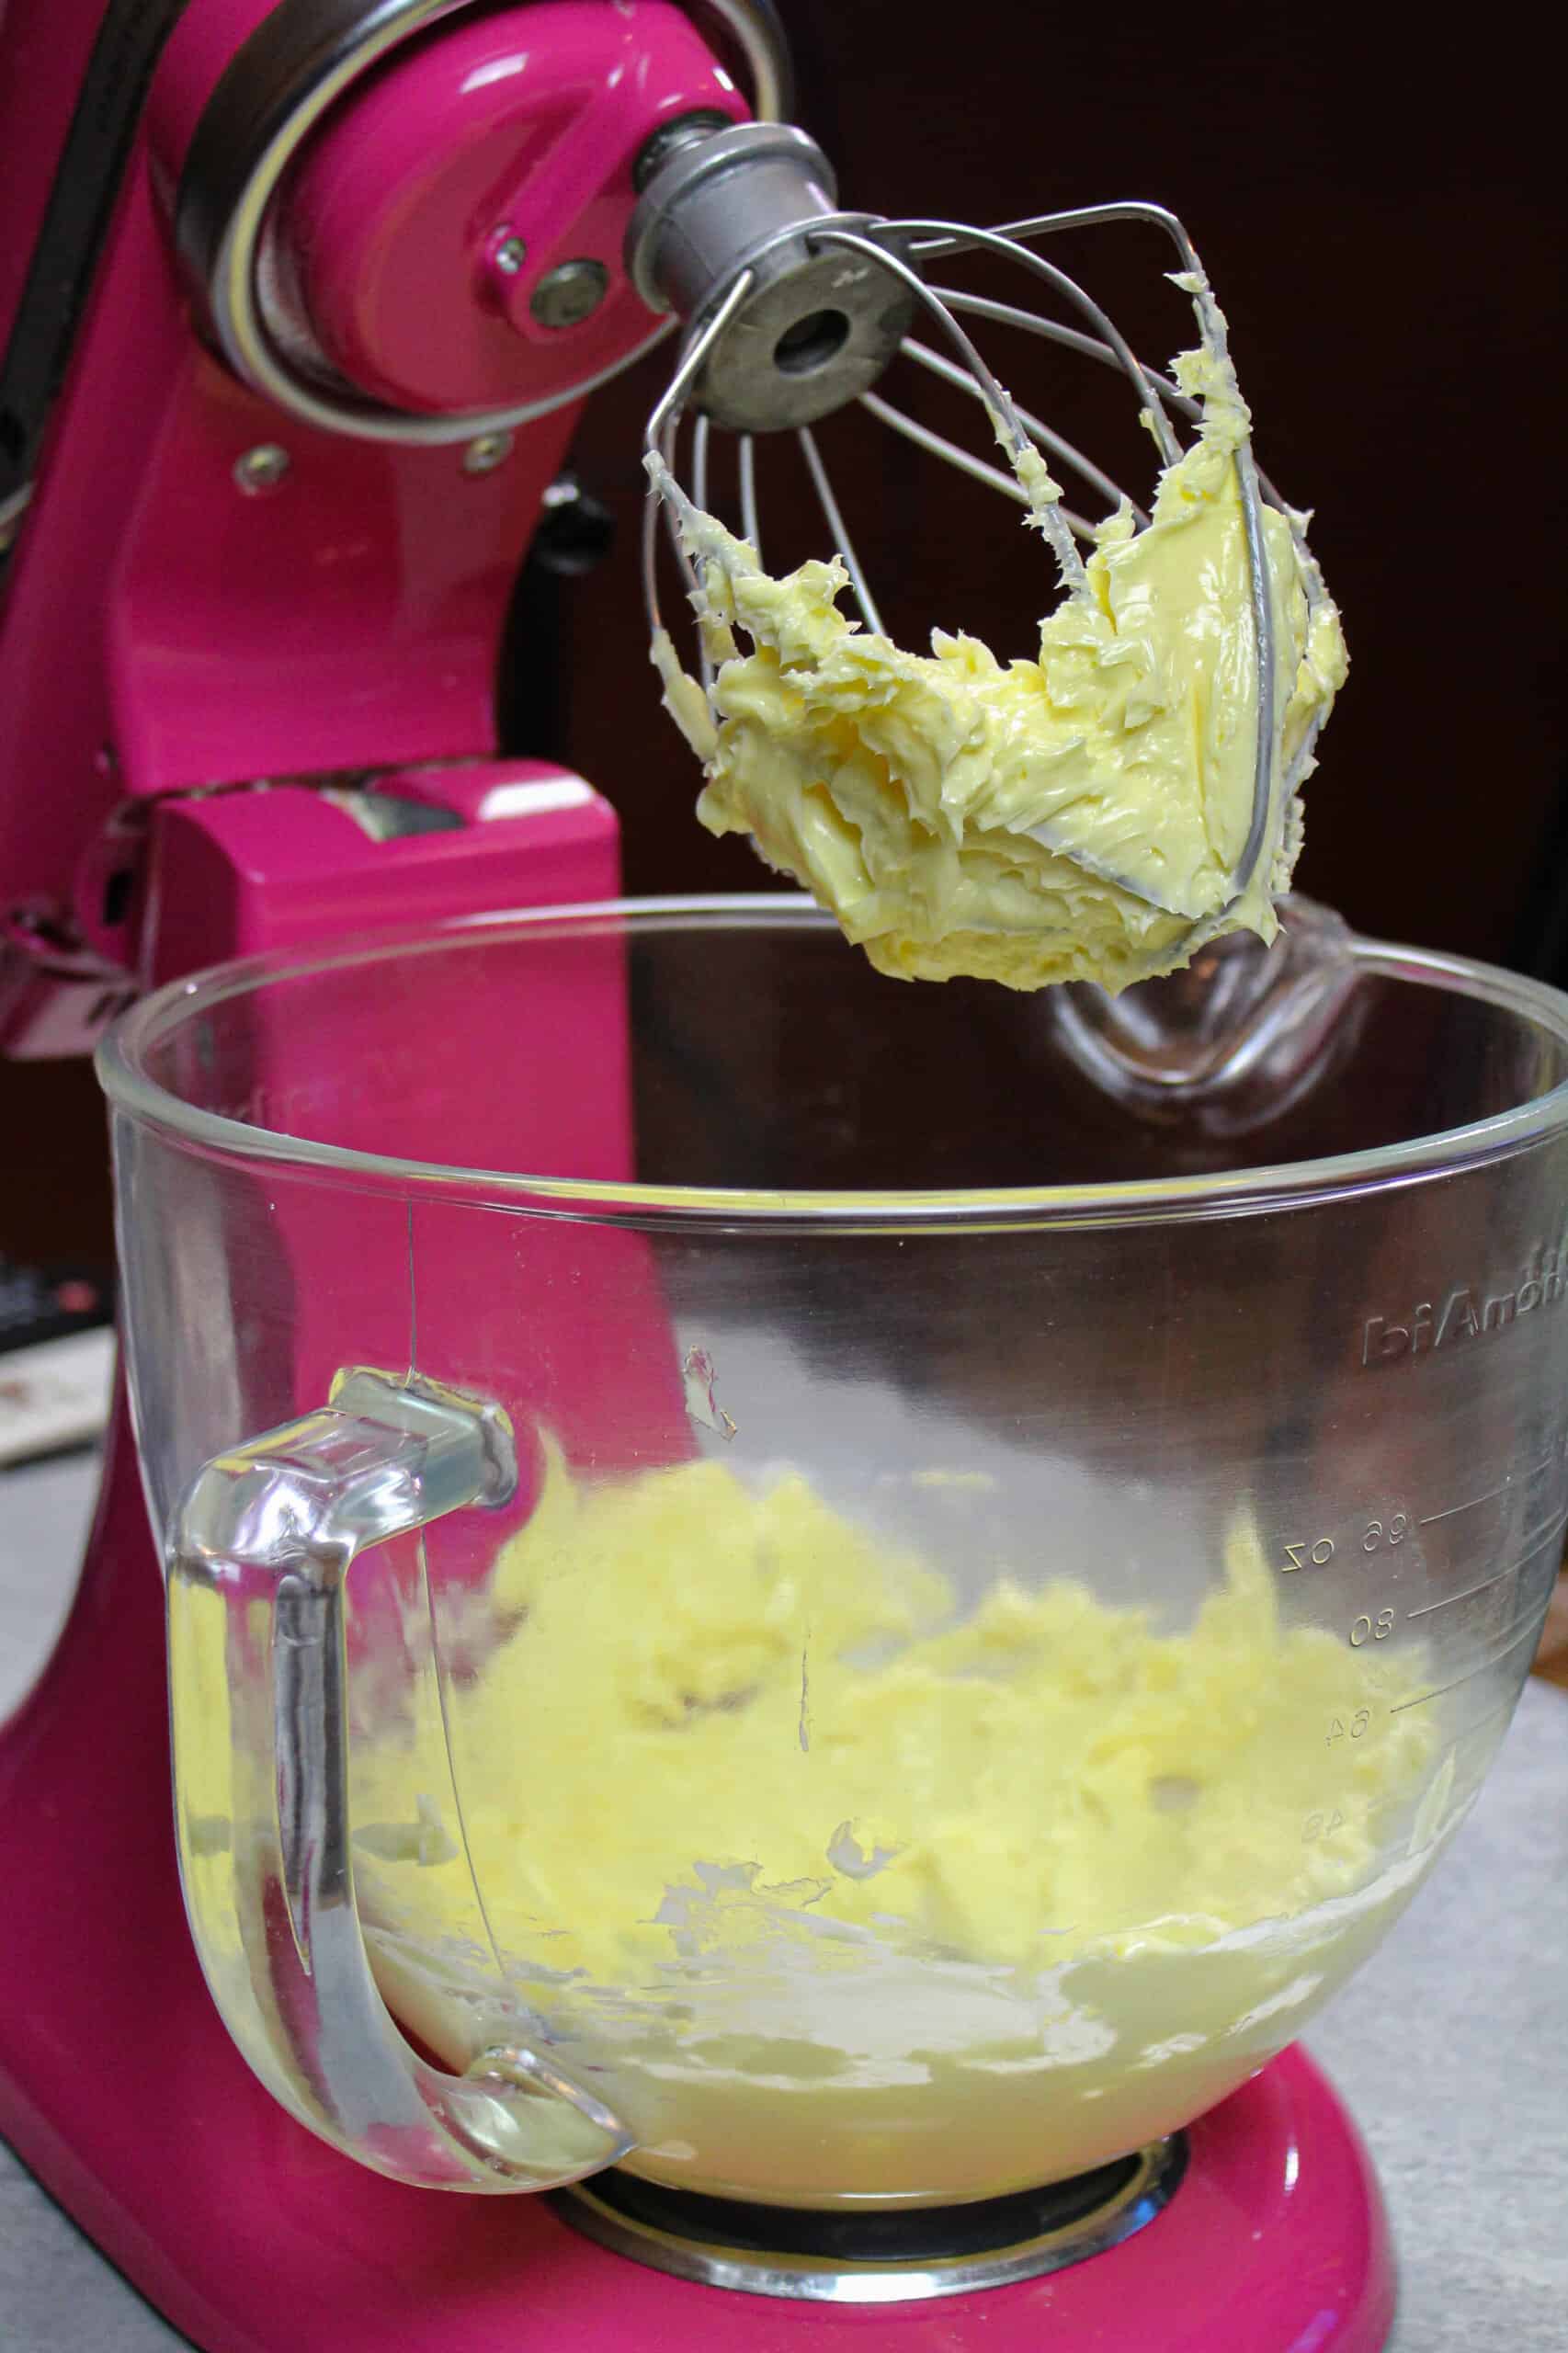 Russian Buttercream - The Easiest Frosting Recipe